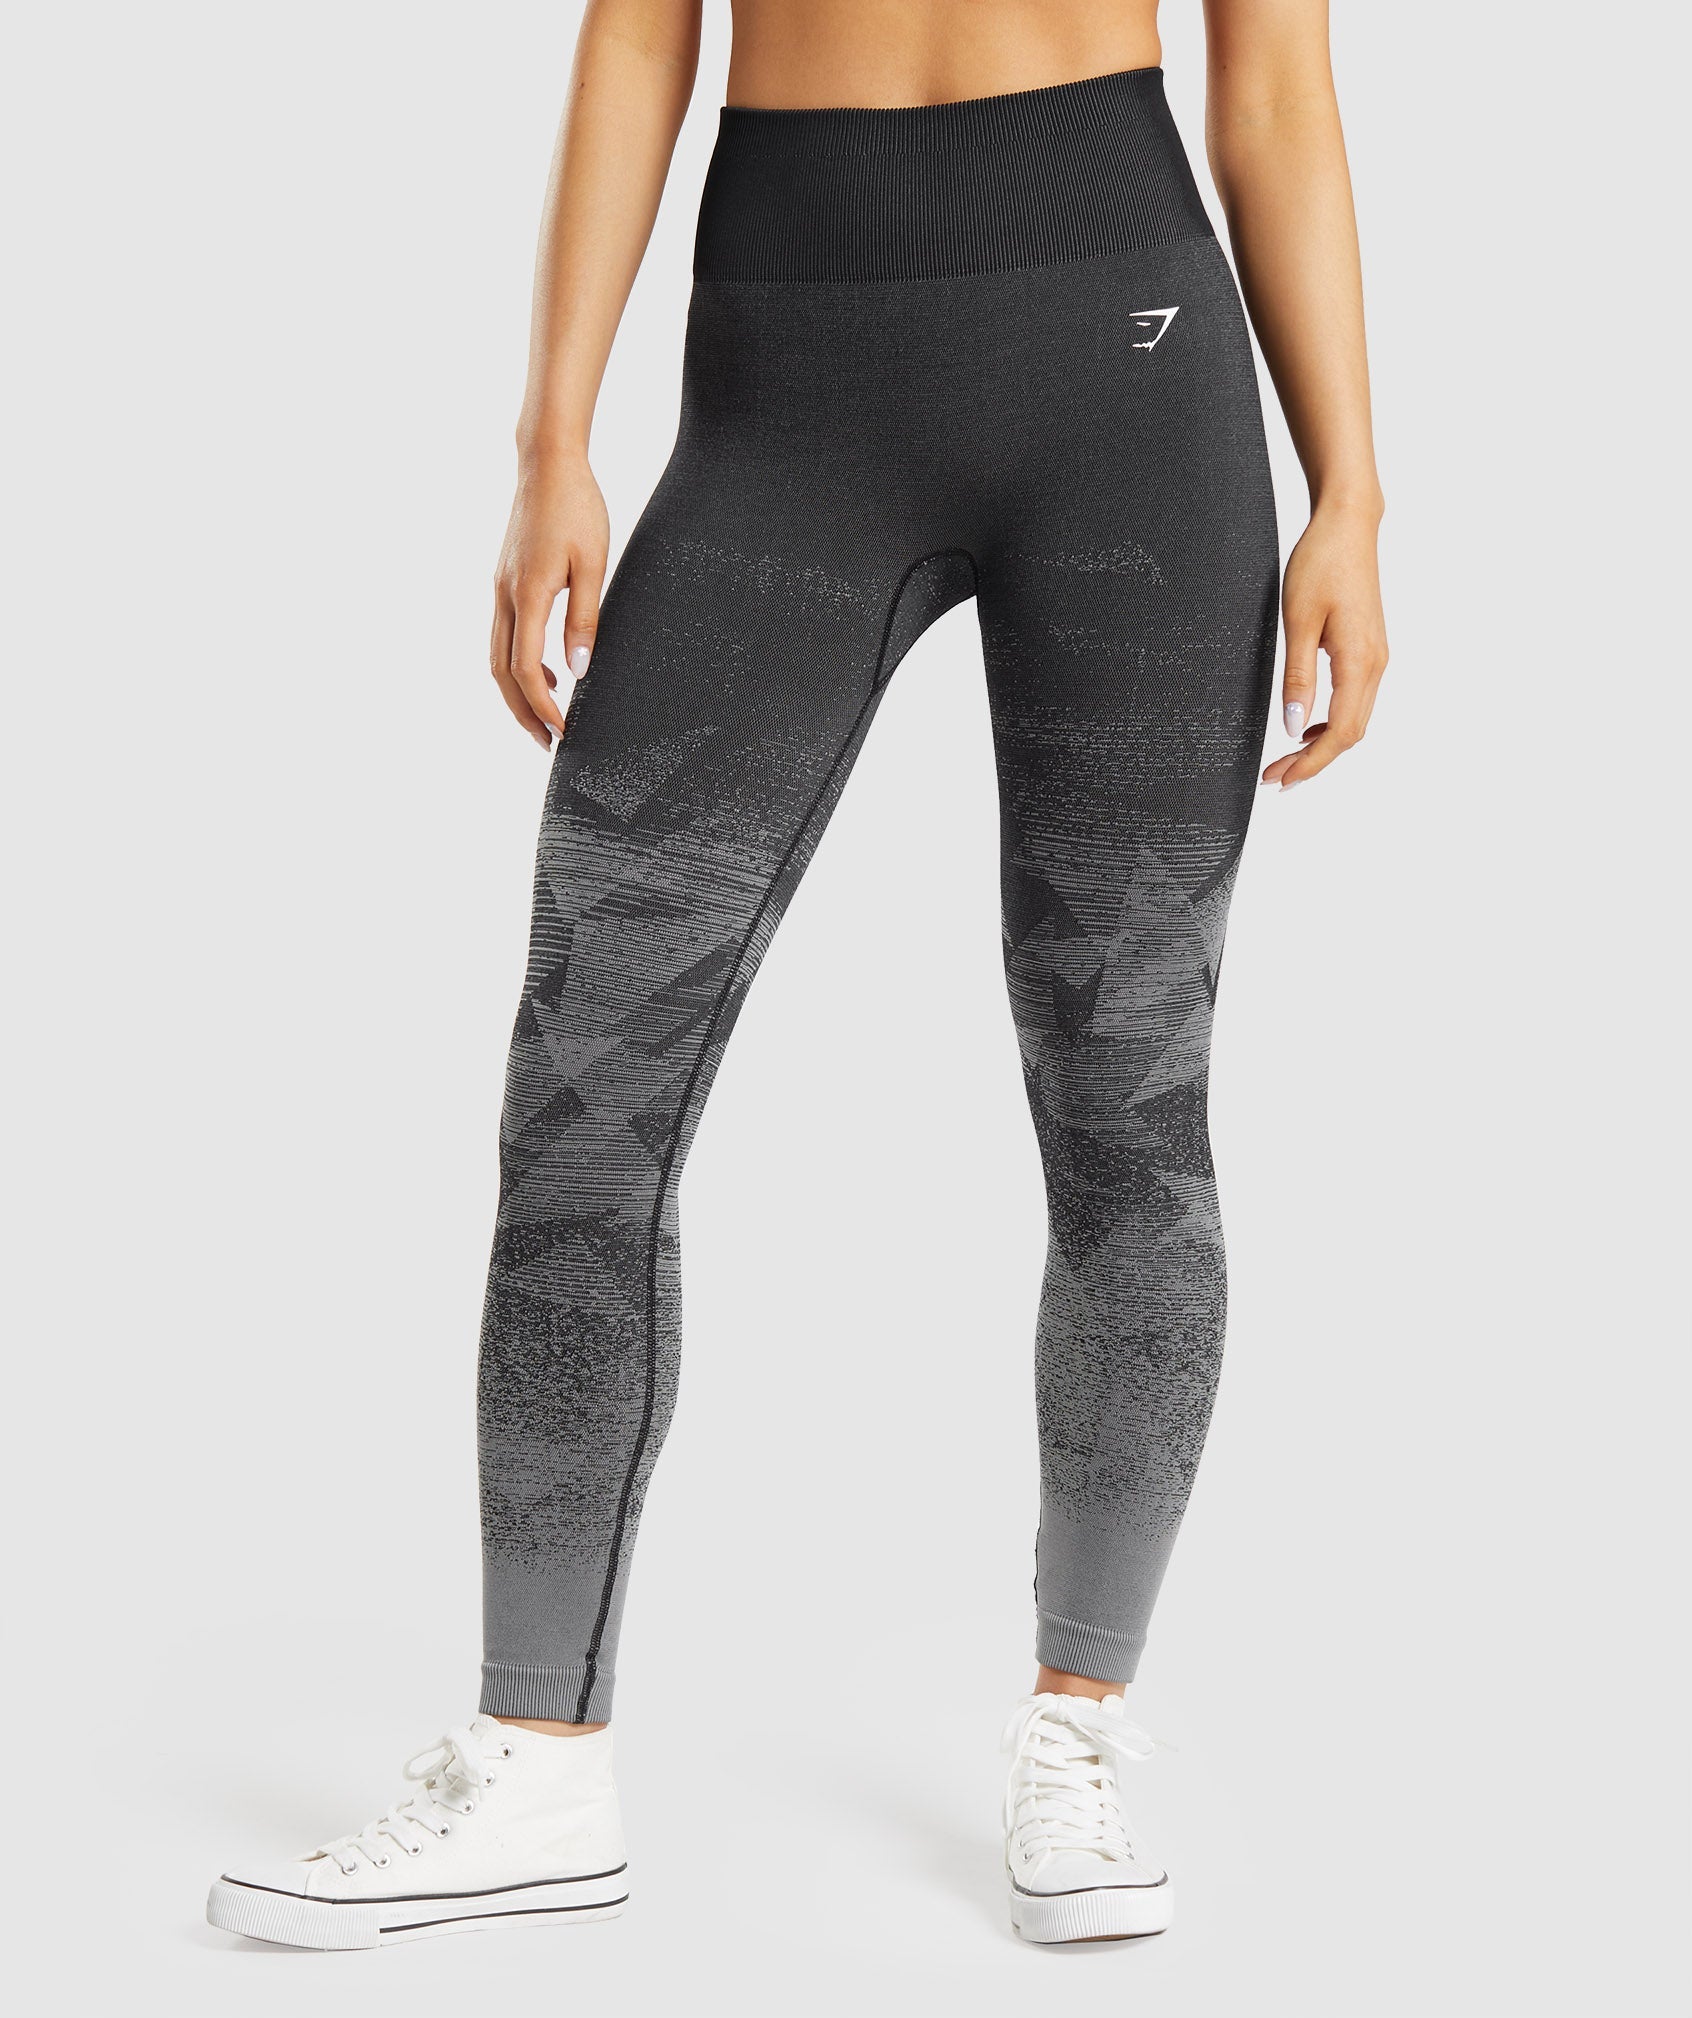 Gymshark Adapt Ombré Grey and Black Leggings - $52 - From Briss